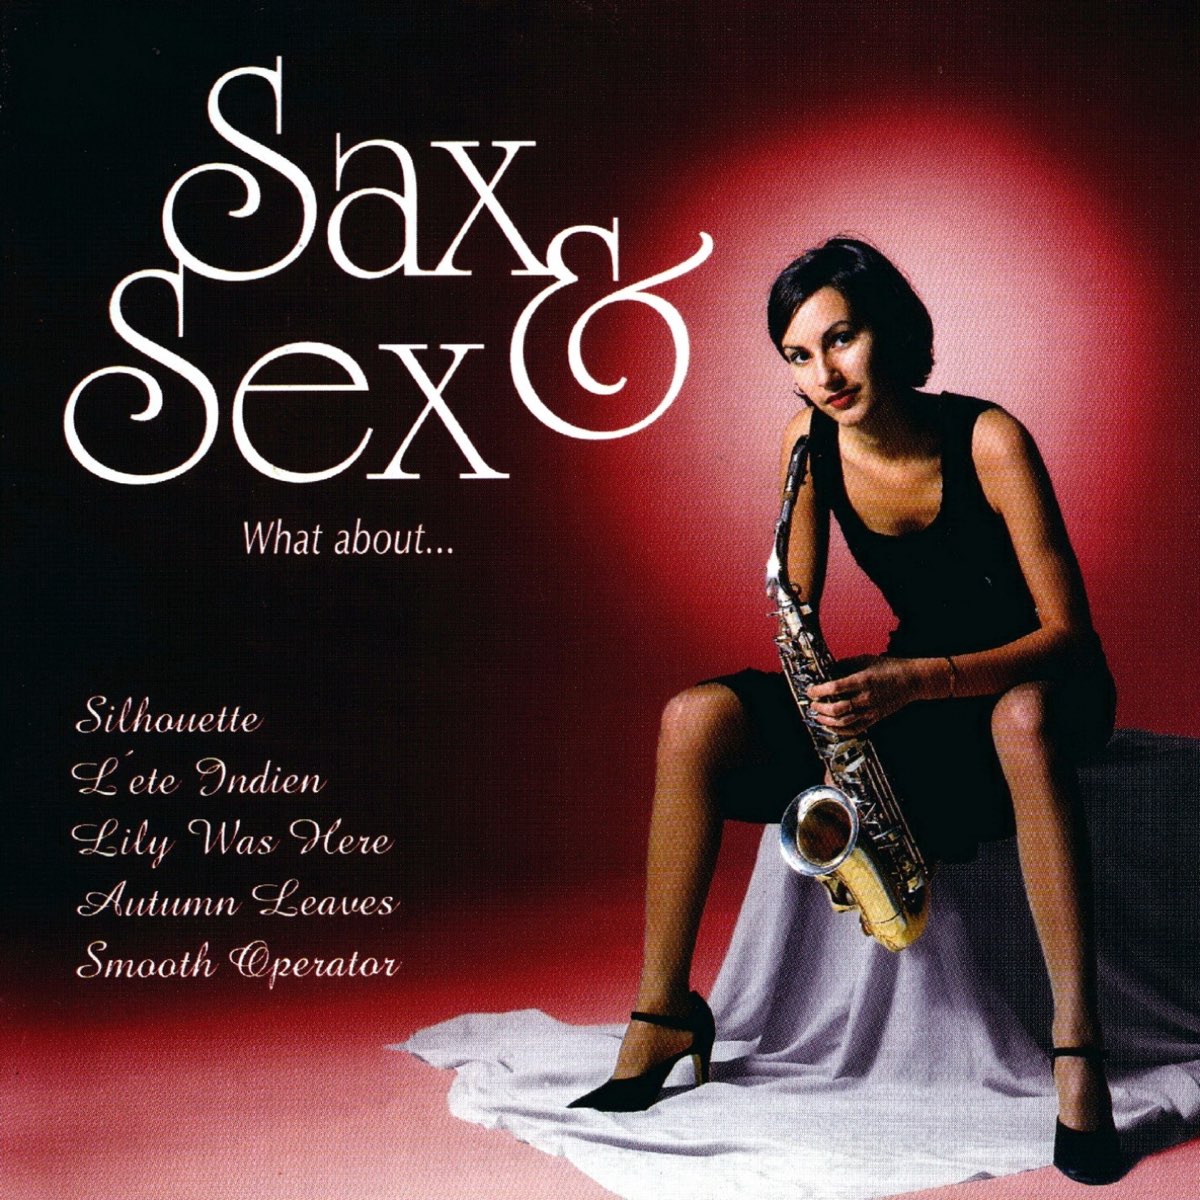 Sax & Sex (What about...) by The Smooth Ballroom Band on Apple Music